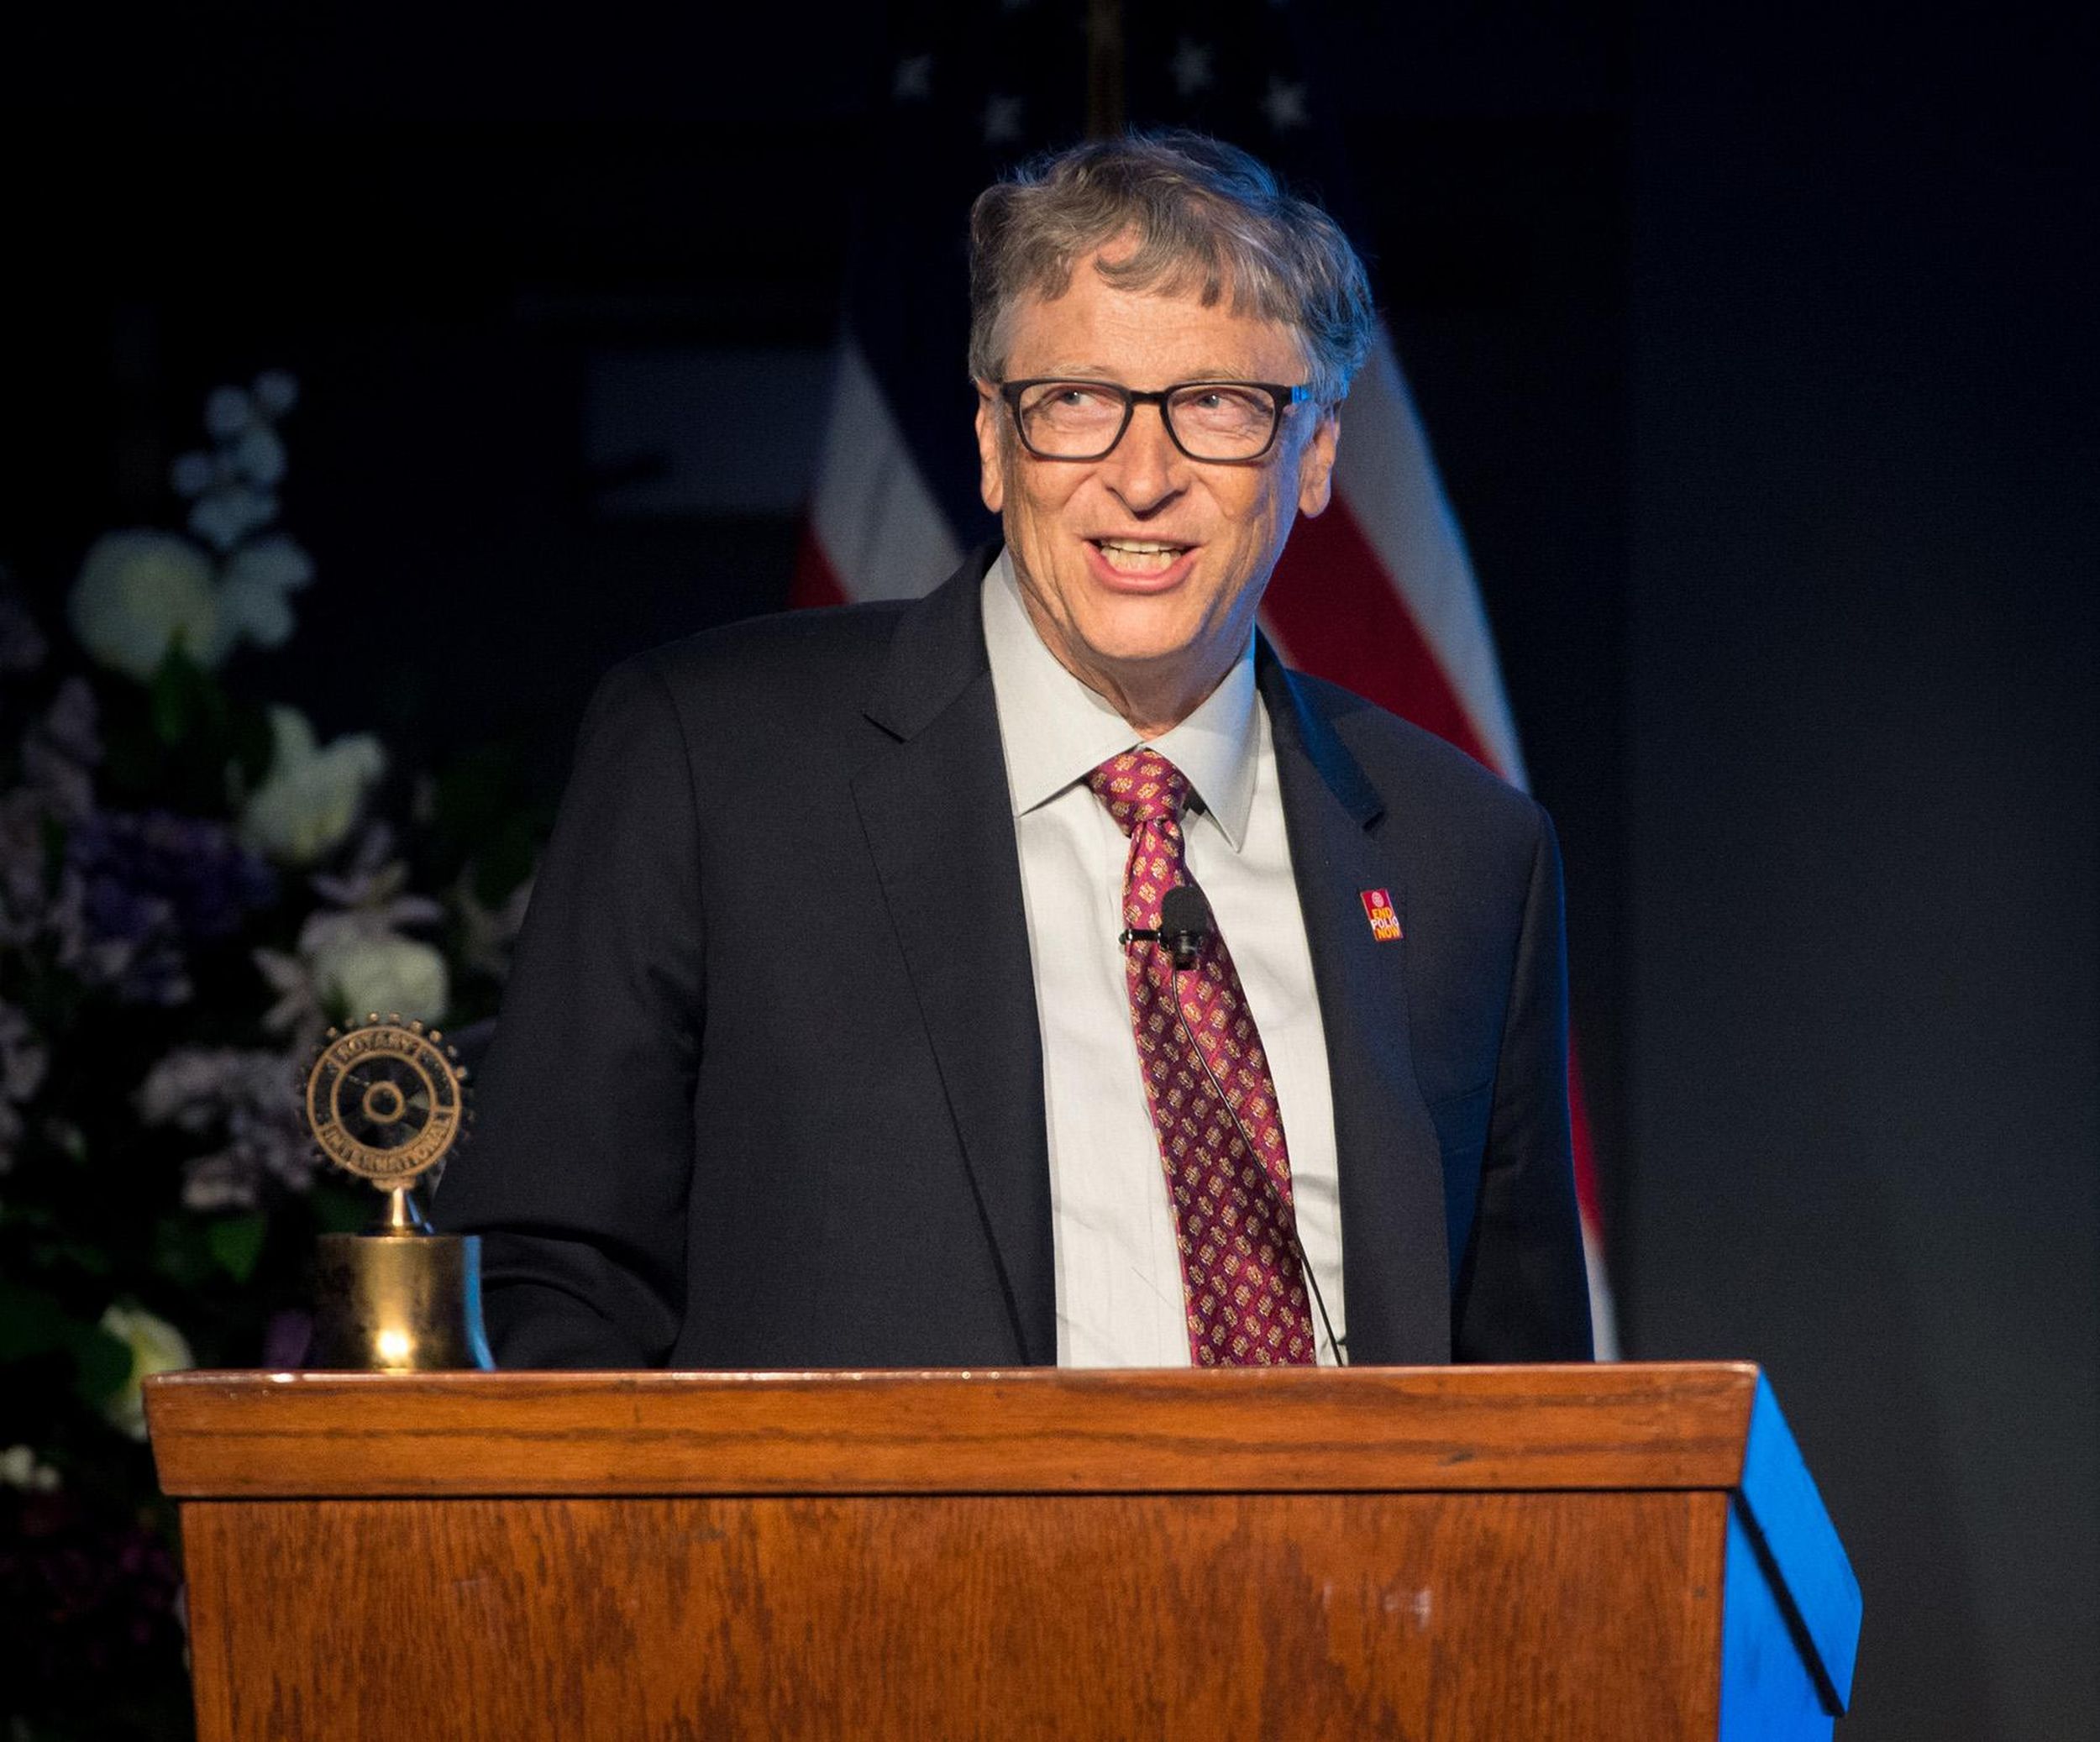 Bill Gates speaks at Rotary International conference in Spokane May